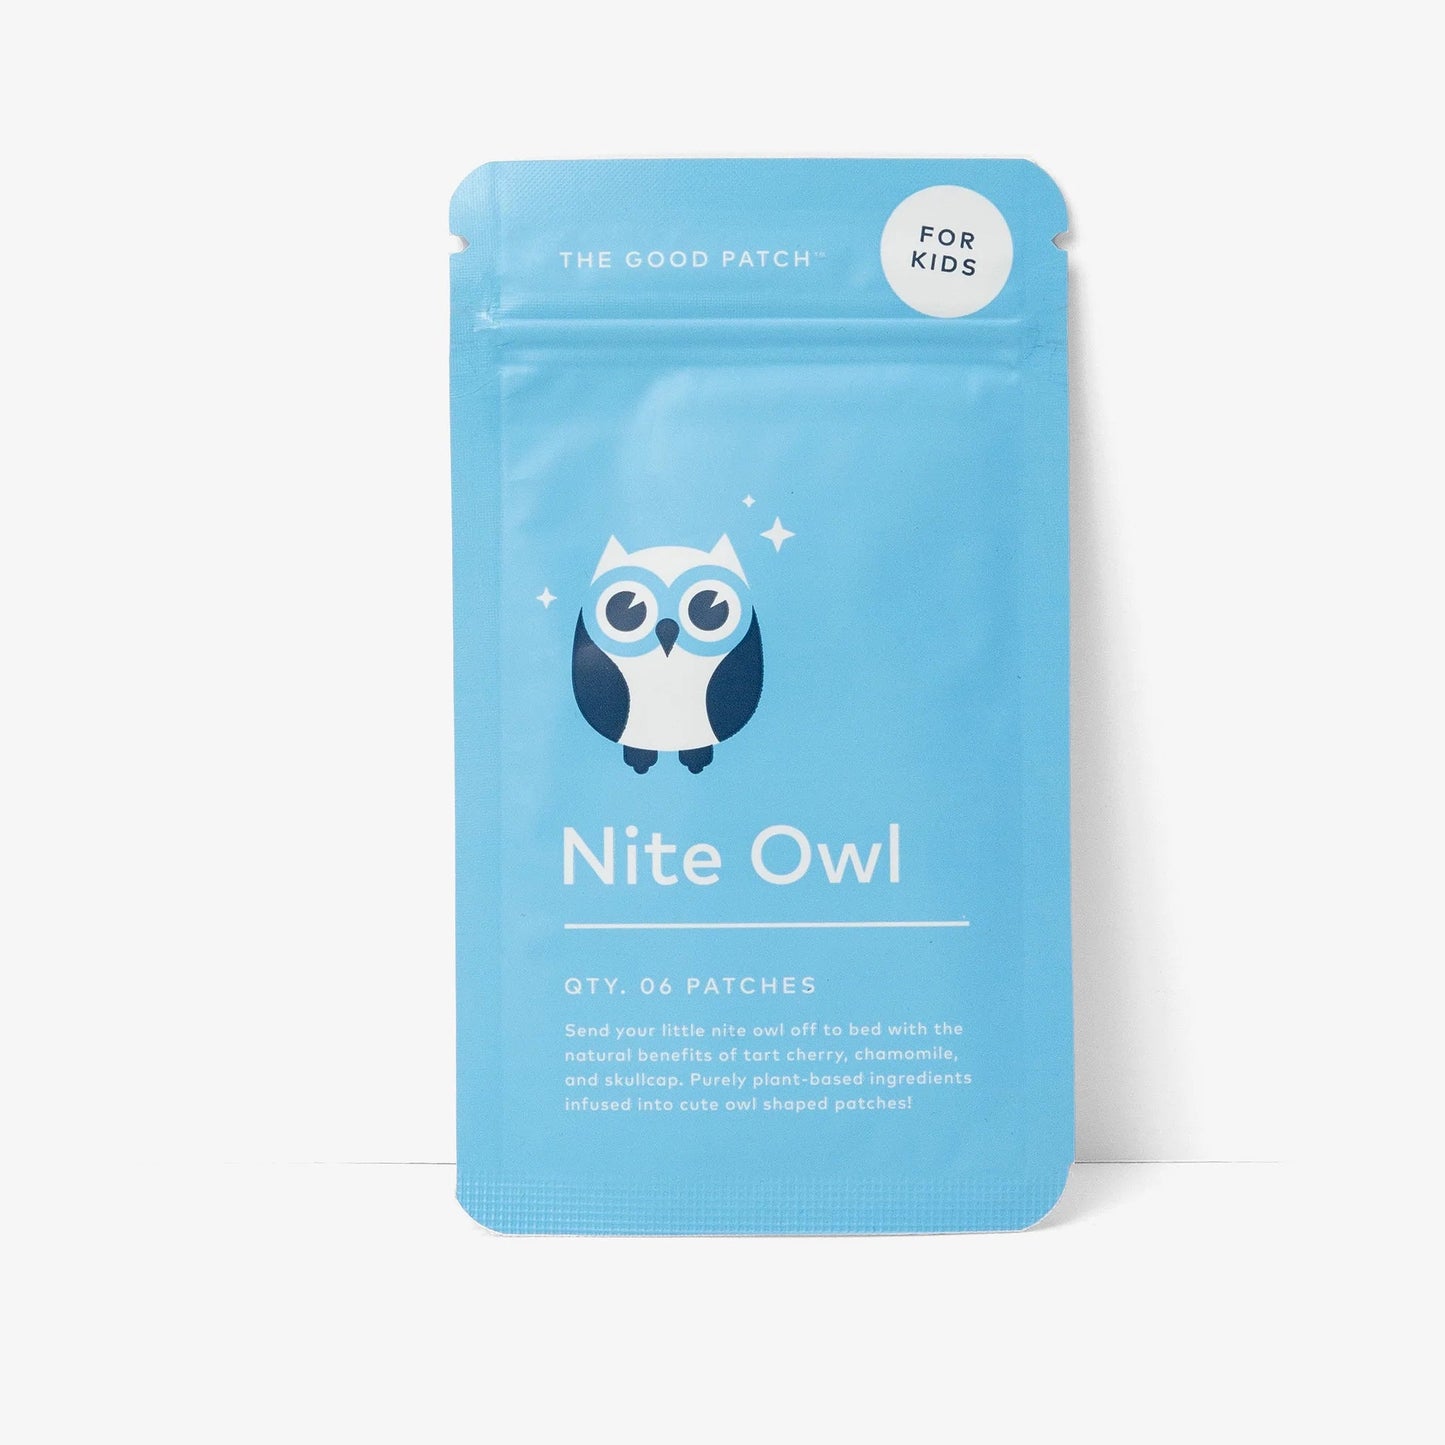 Buy Online Best NITE OWL | Buy innovative clinical skincare products - TOPBODY